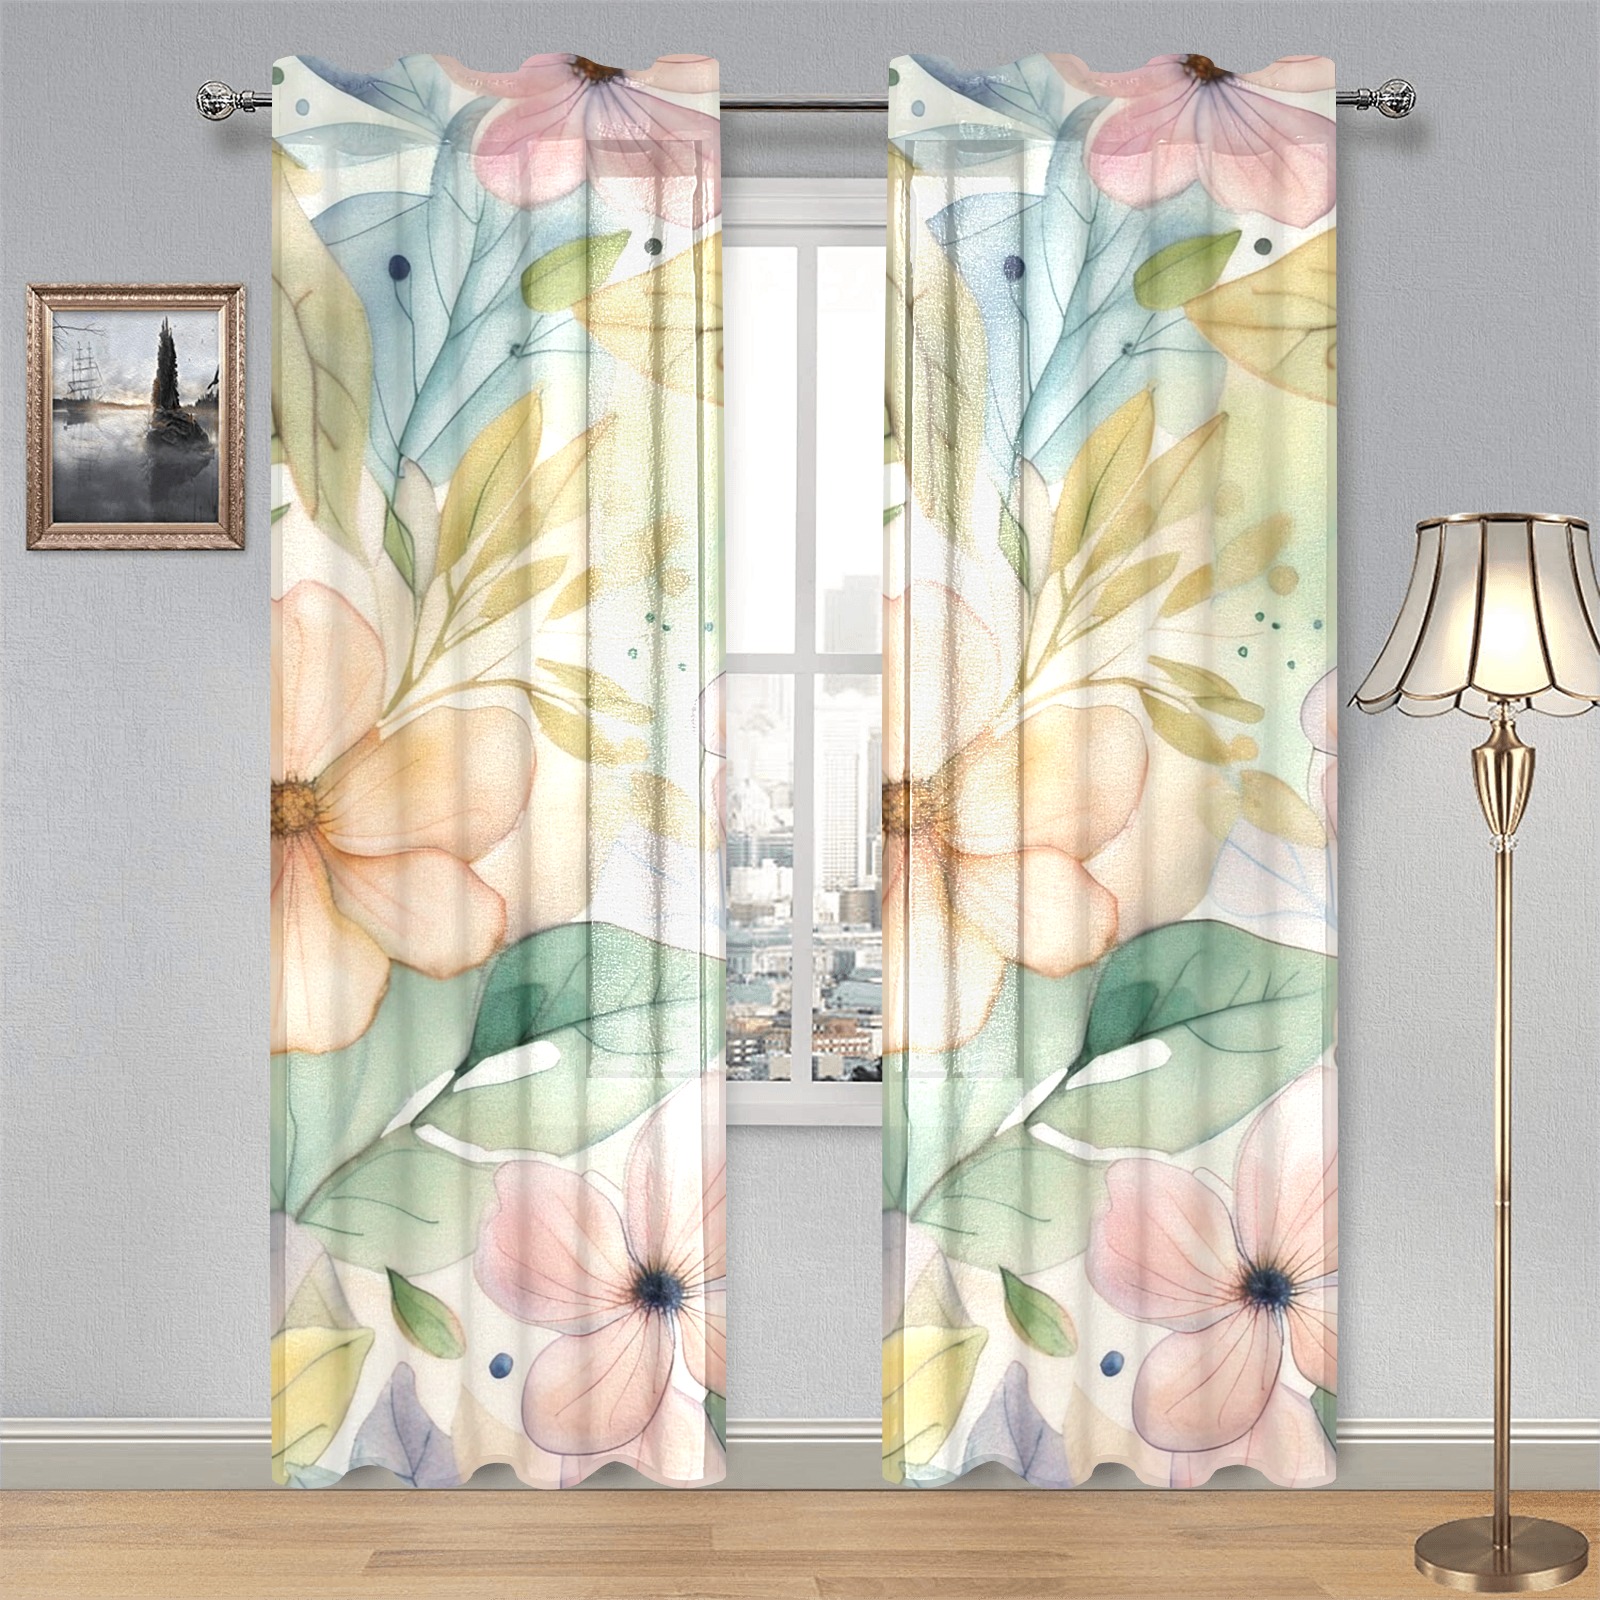 Watercolor Floral 1 Gauze Curtain 28"x84" (Two-Piece)